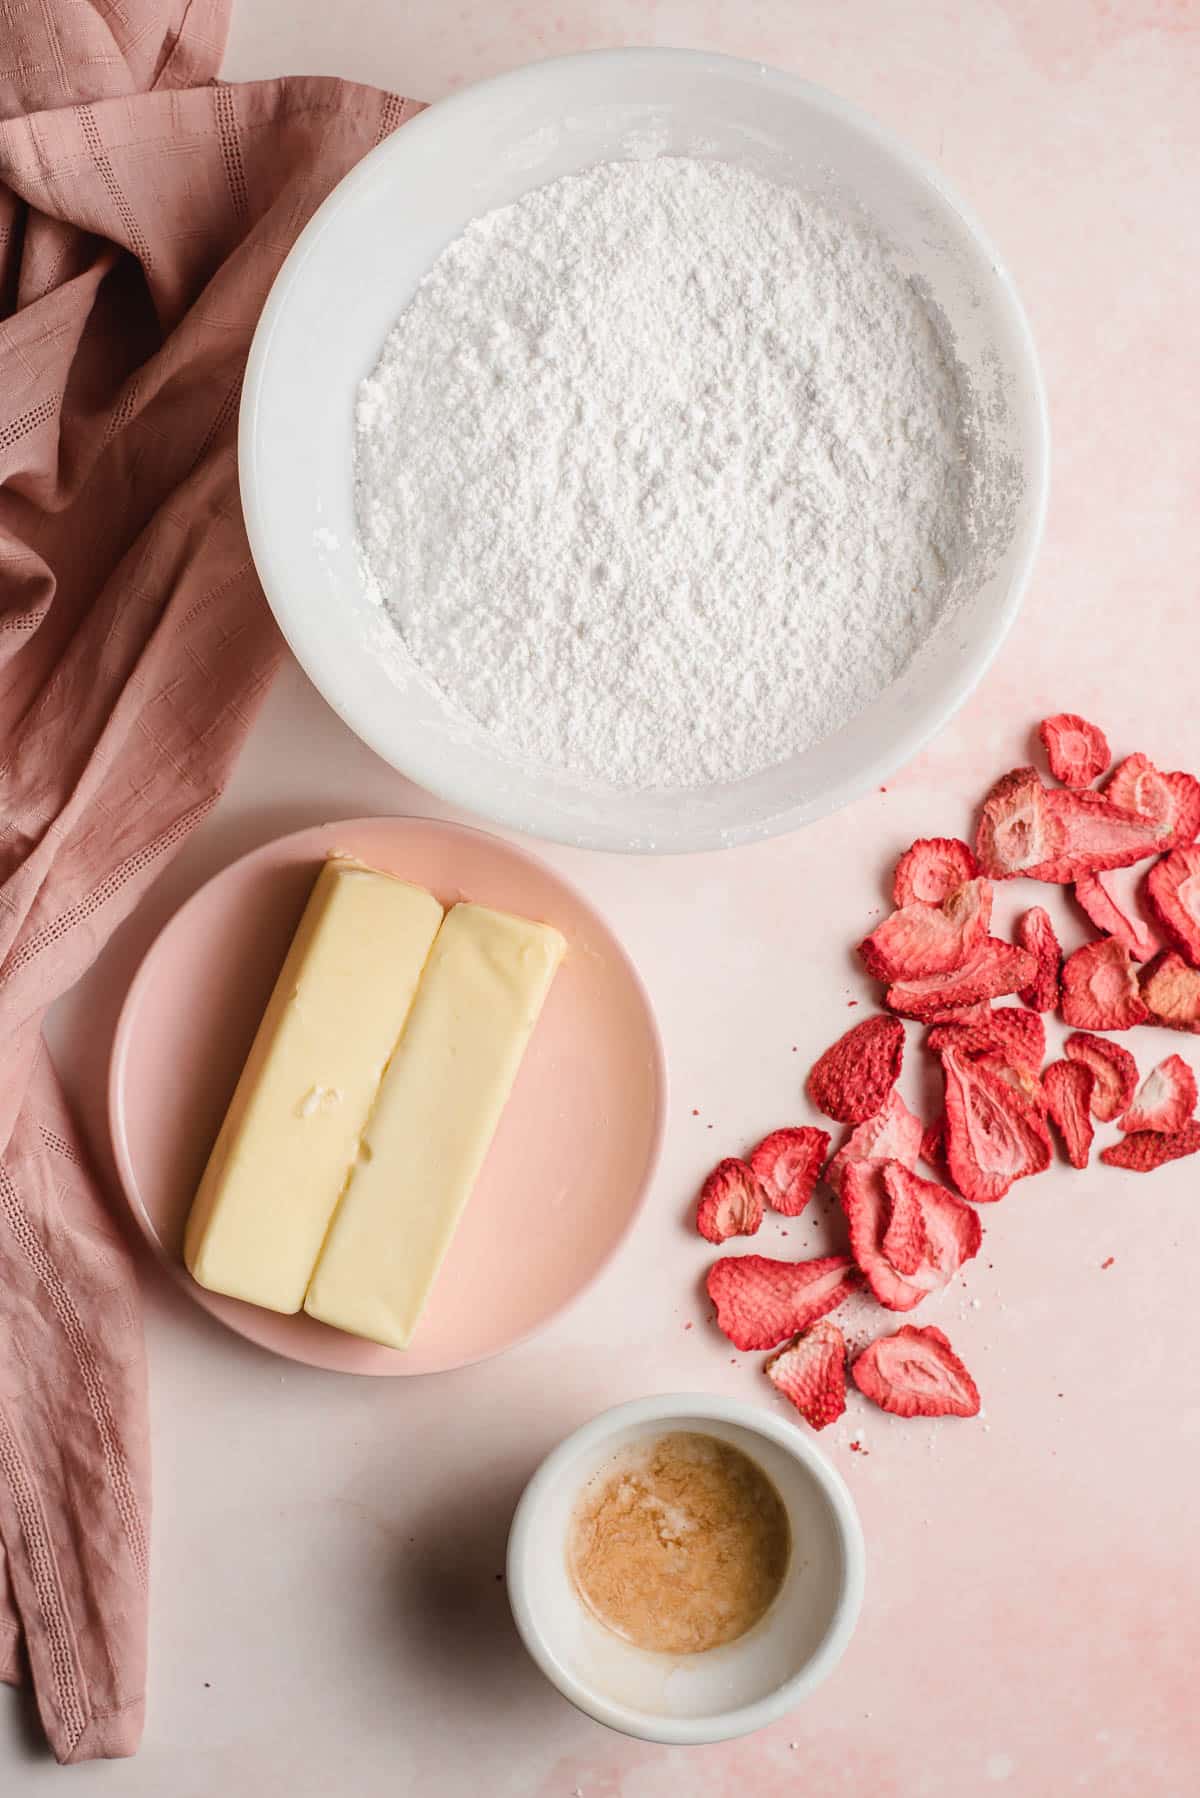 Powdered sugar, butter, zestless strawberries, and vanilla pericope shown in bowls on a pink background.